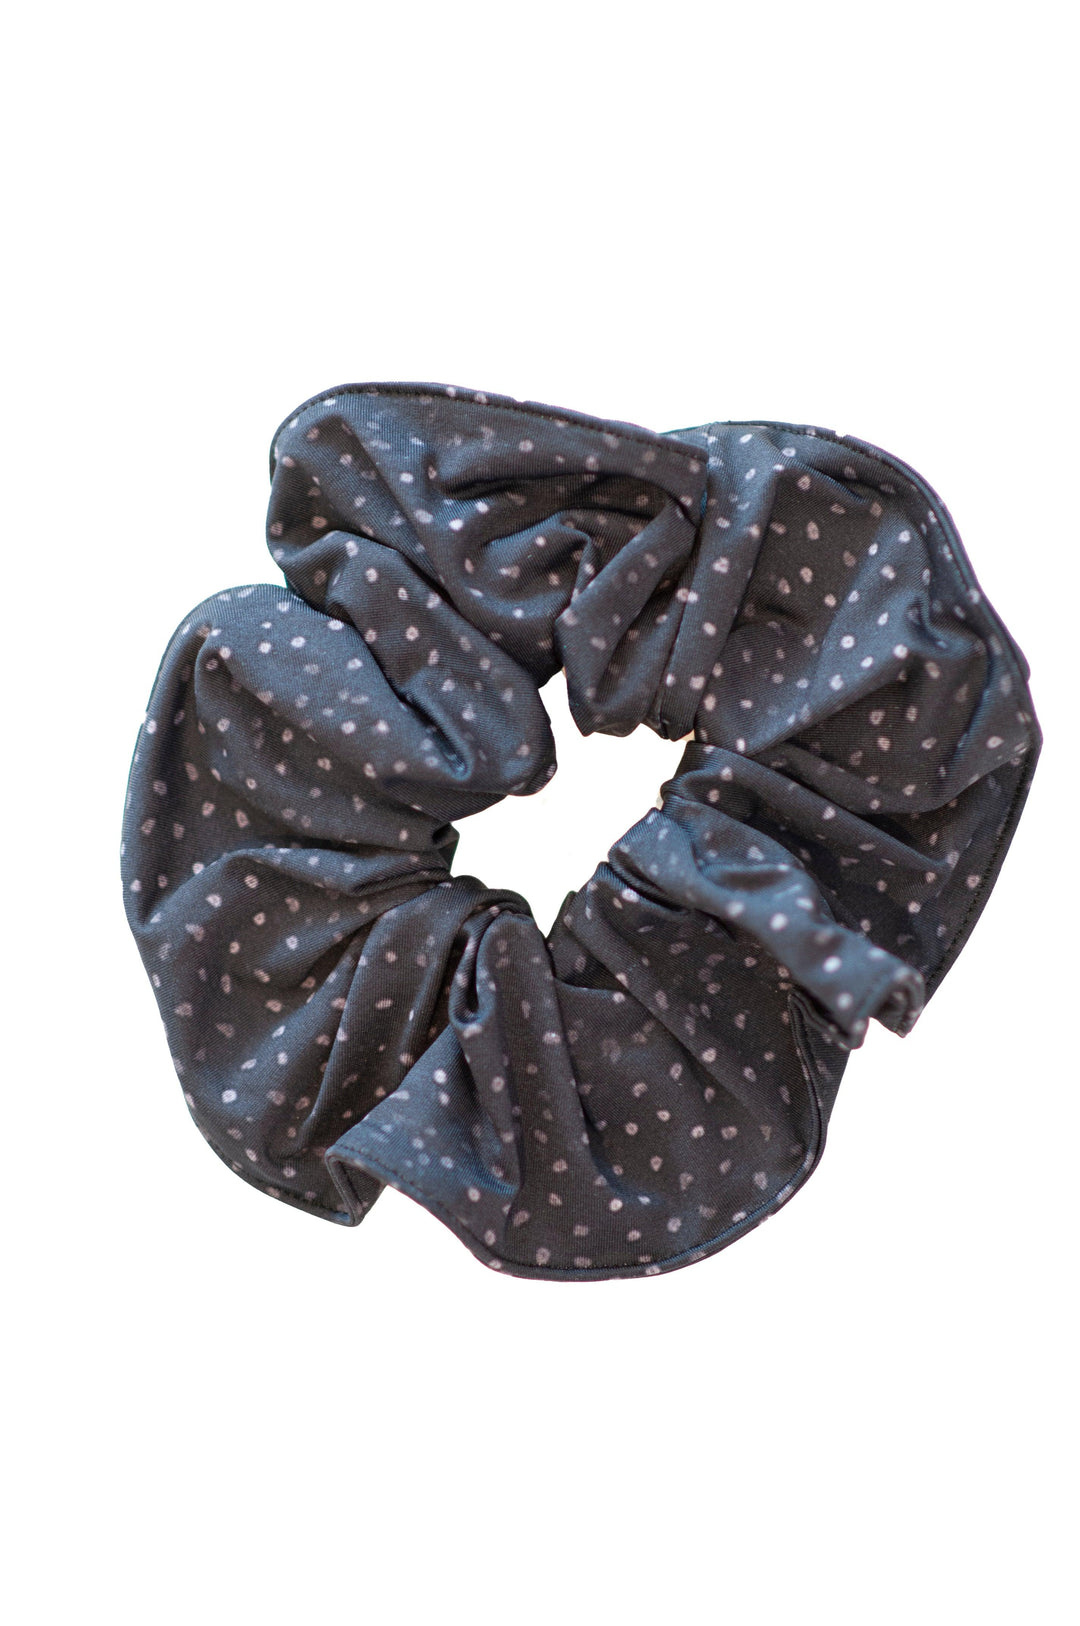 UPCYCLED SCRUNCHIES - Party of three!